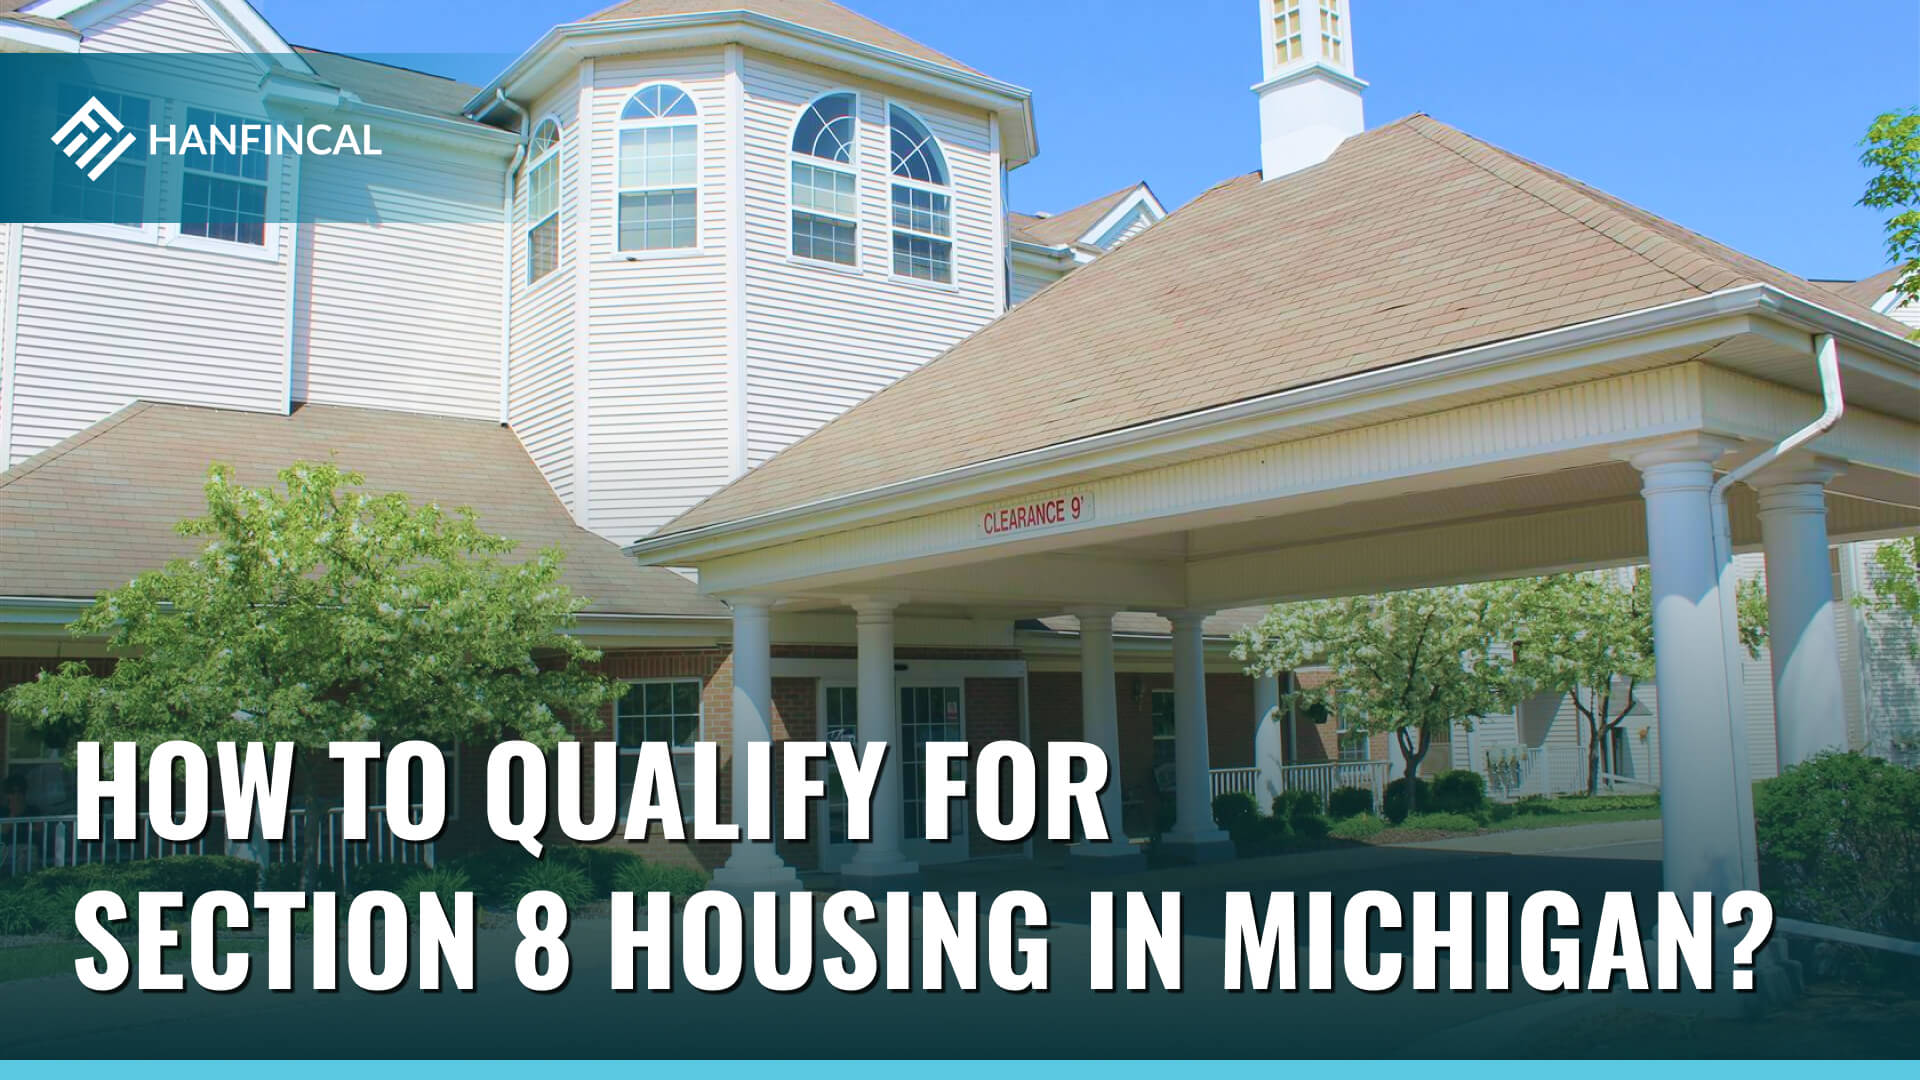 How to qualify for Section 8 Housing in Michigan (MI)?